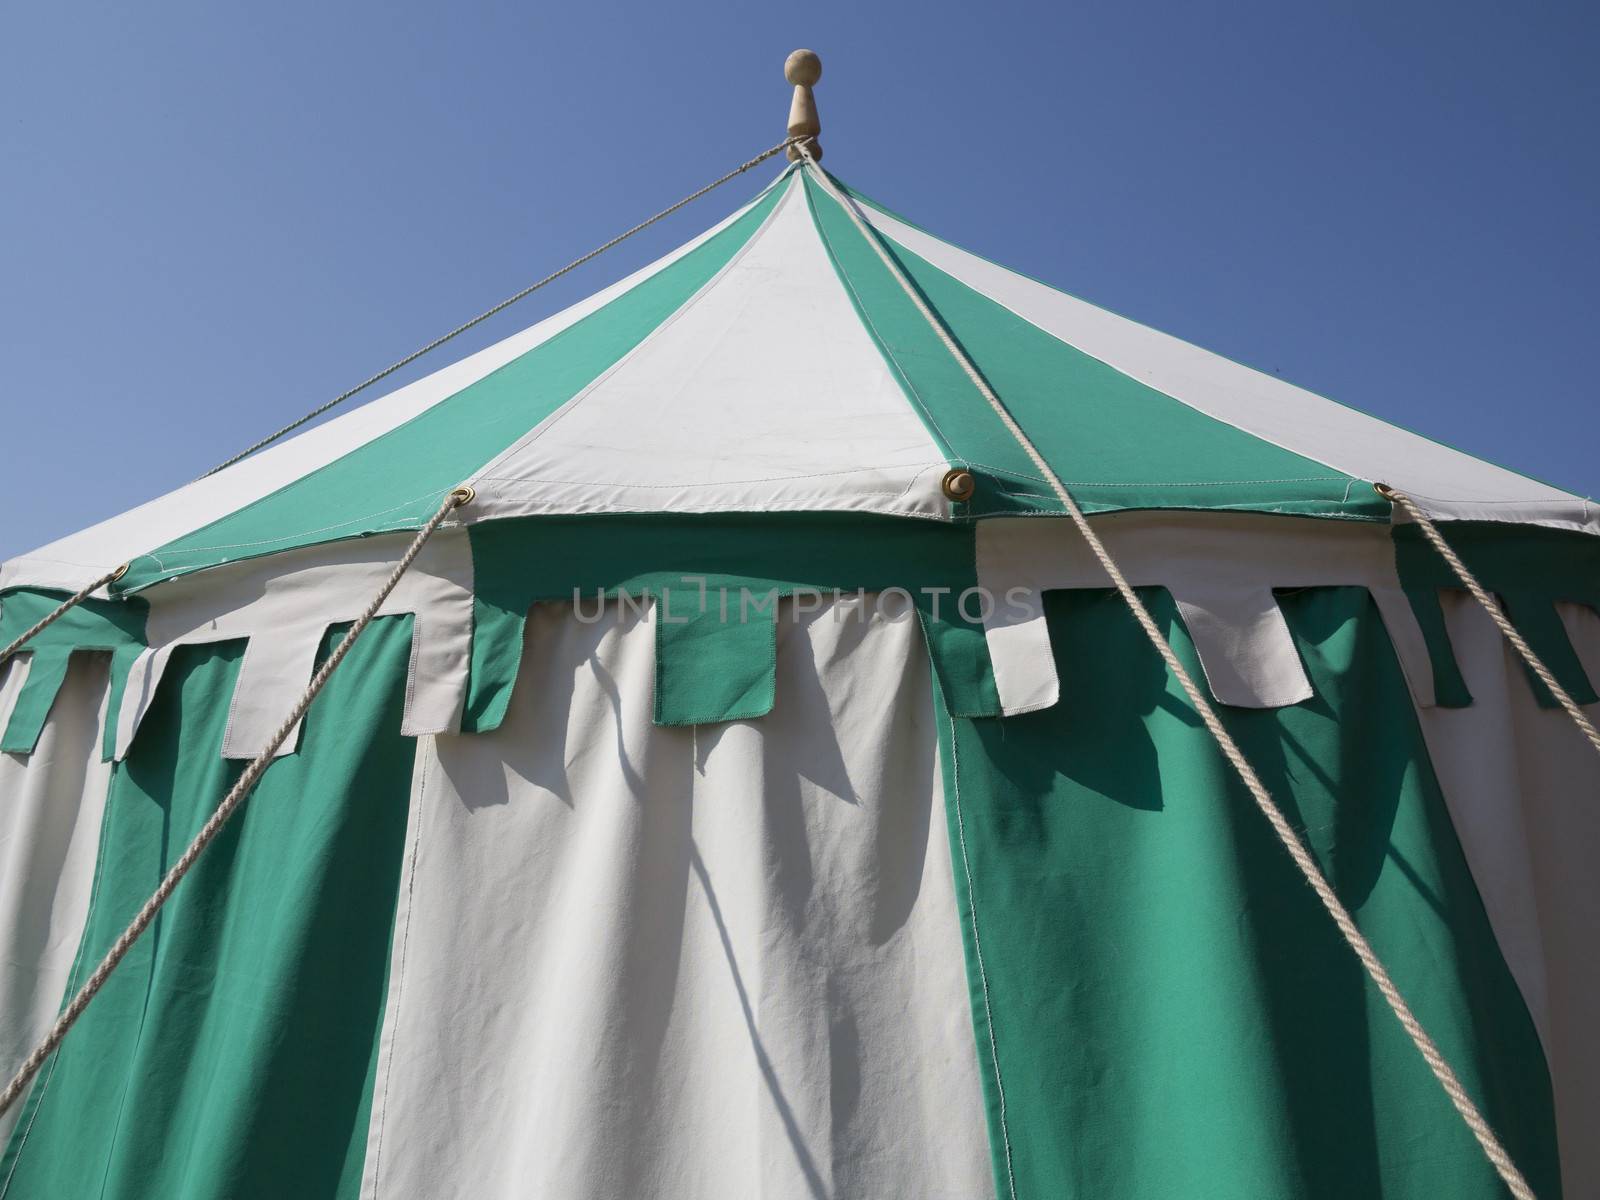 Medieval tent detail by ABCDK